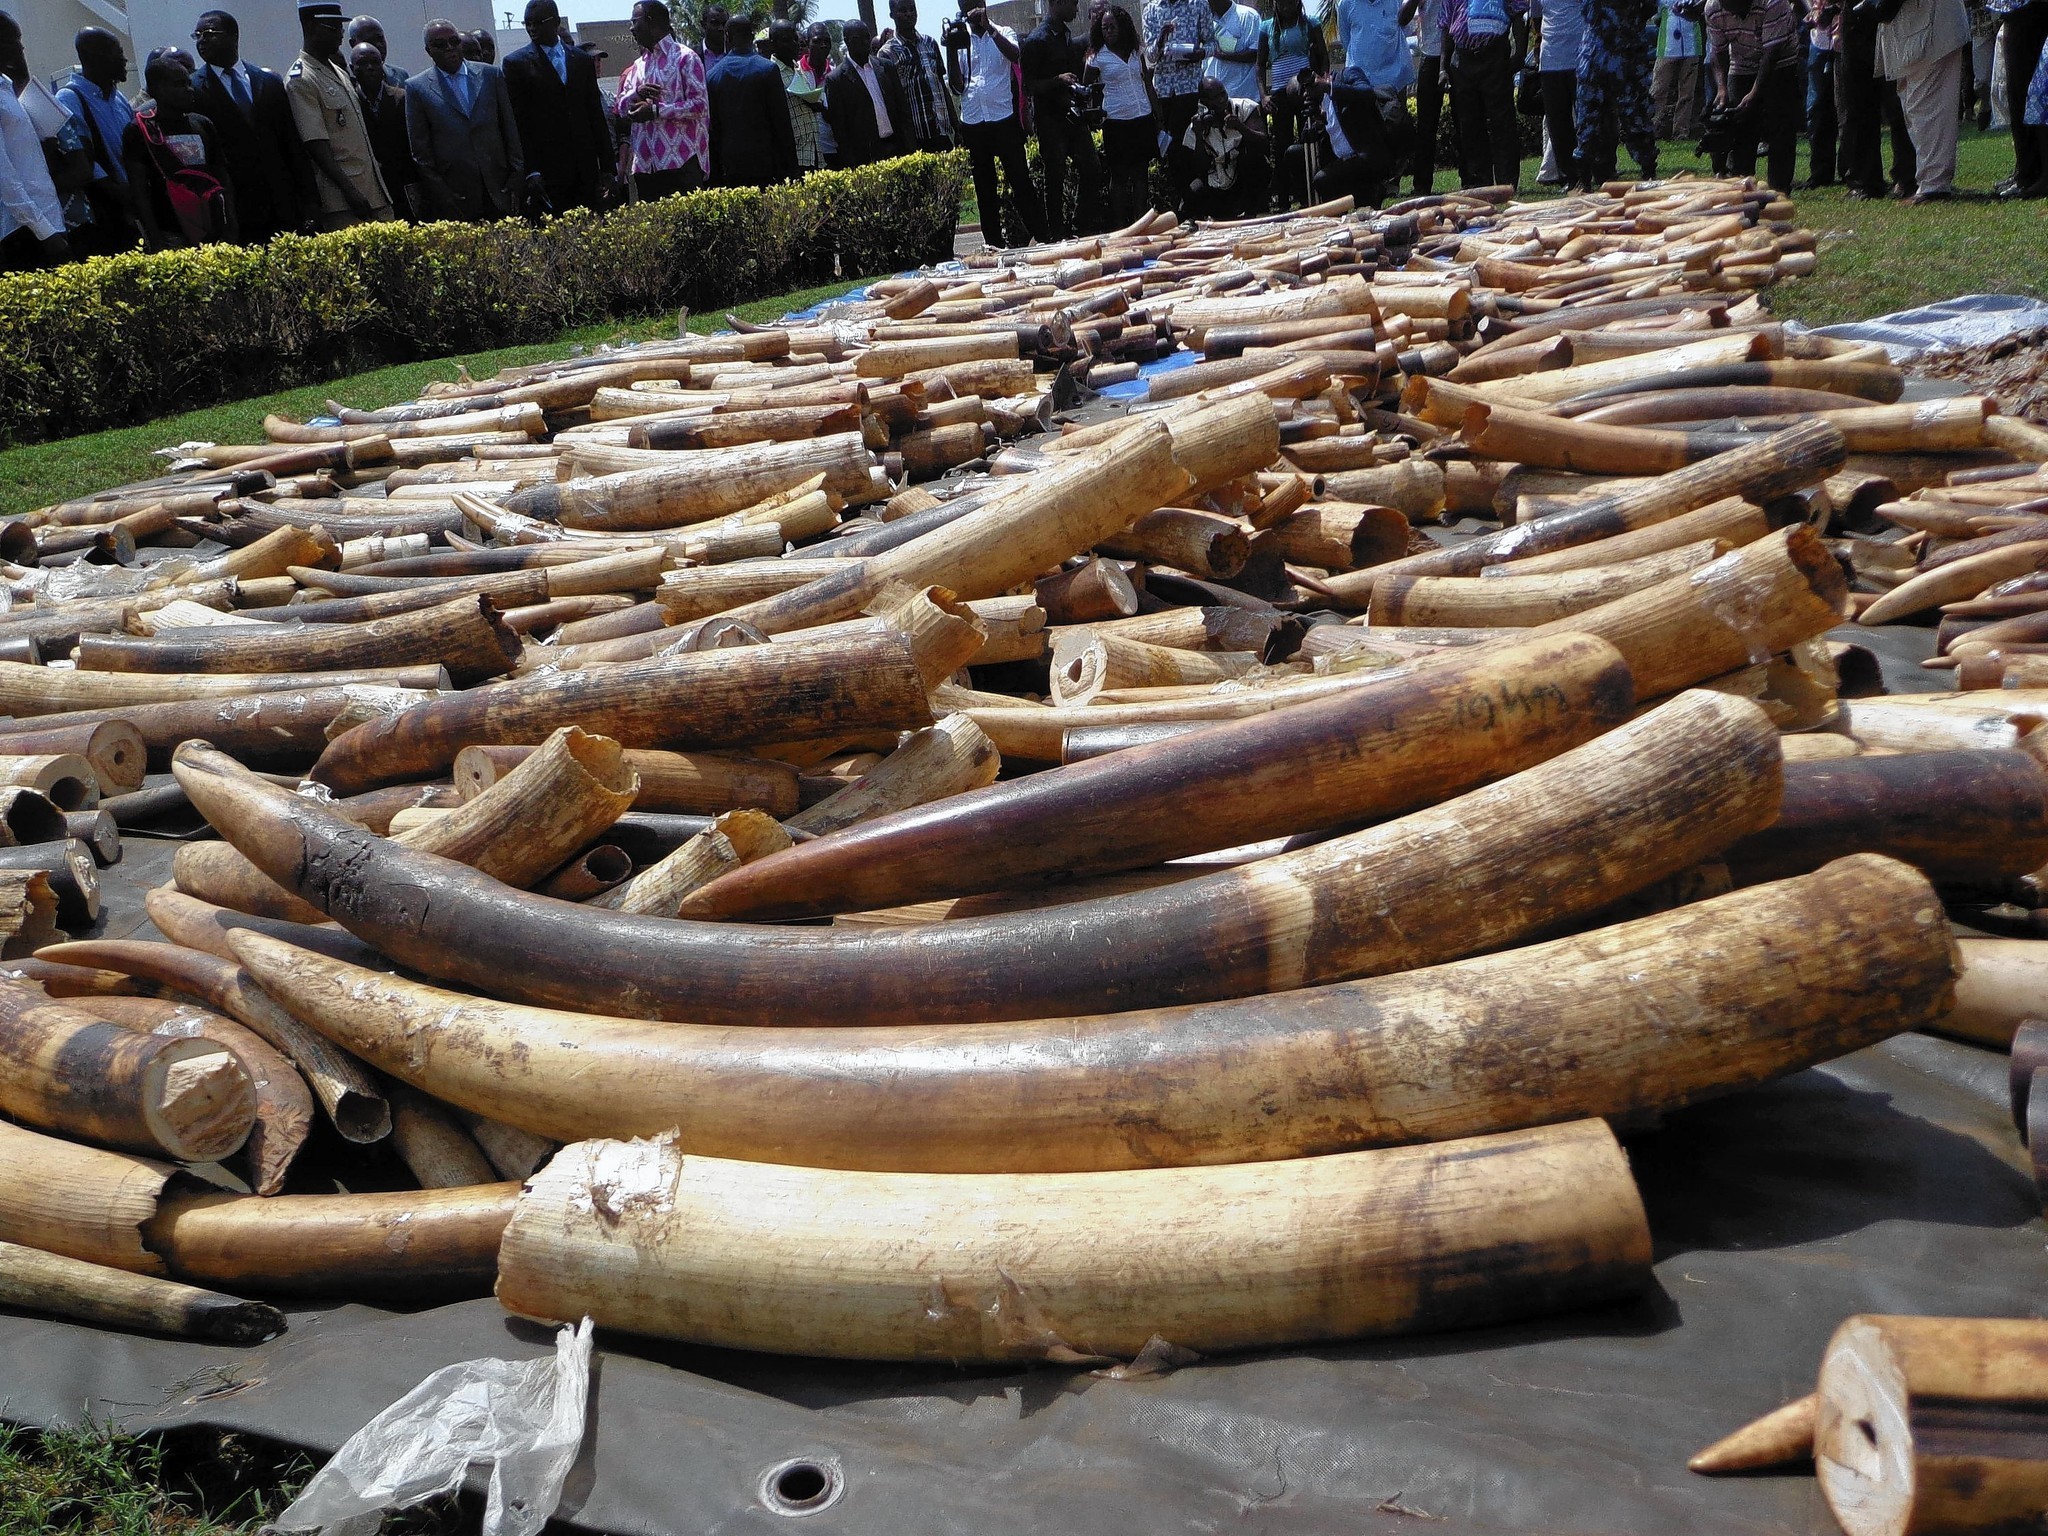 China Bans Import of Ivory Carvings for One Year | Environmental Geography